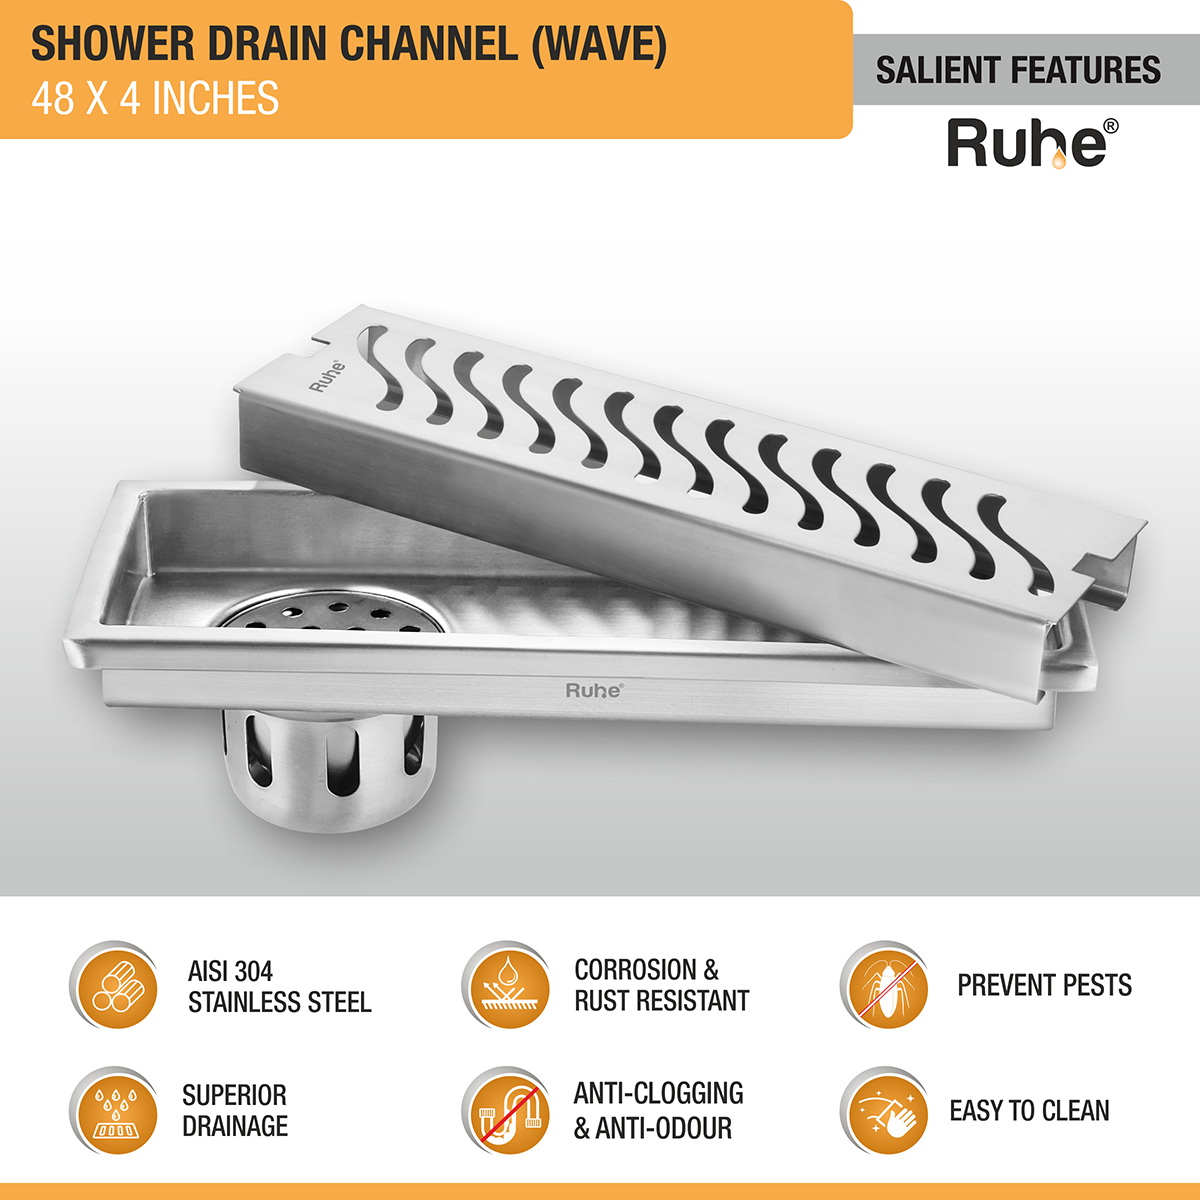 Wave Shower Drain Channel (48 X 4 Inches) with Cockroach Trap (304 Grade) features